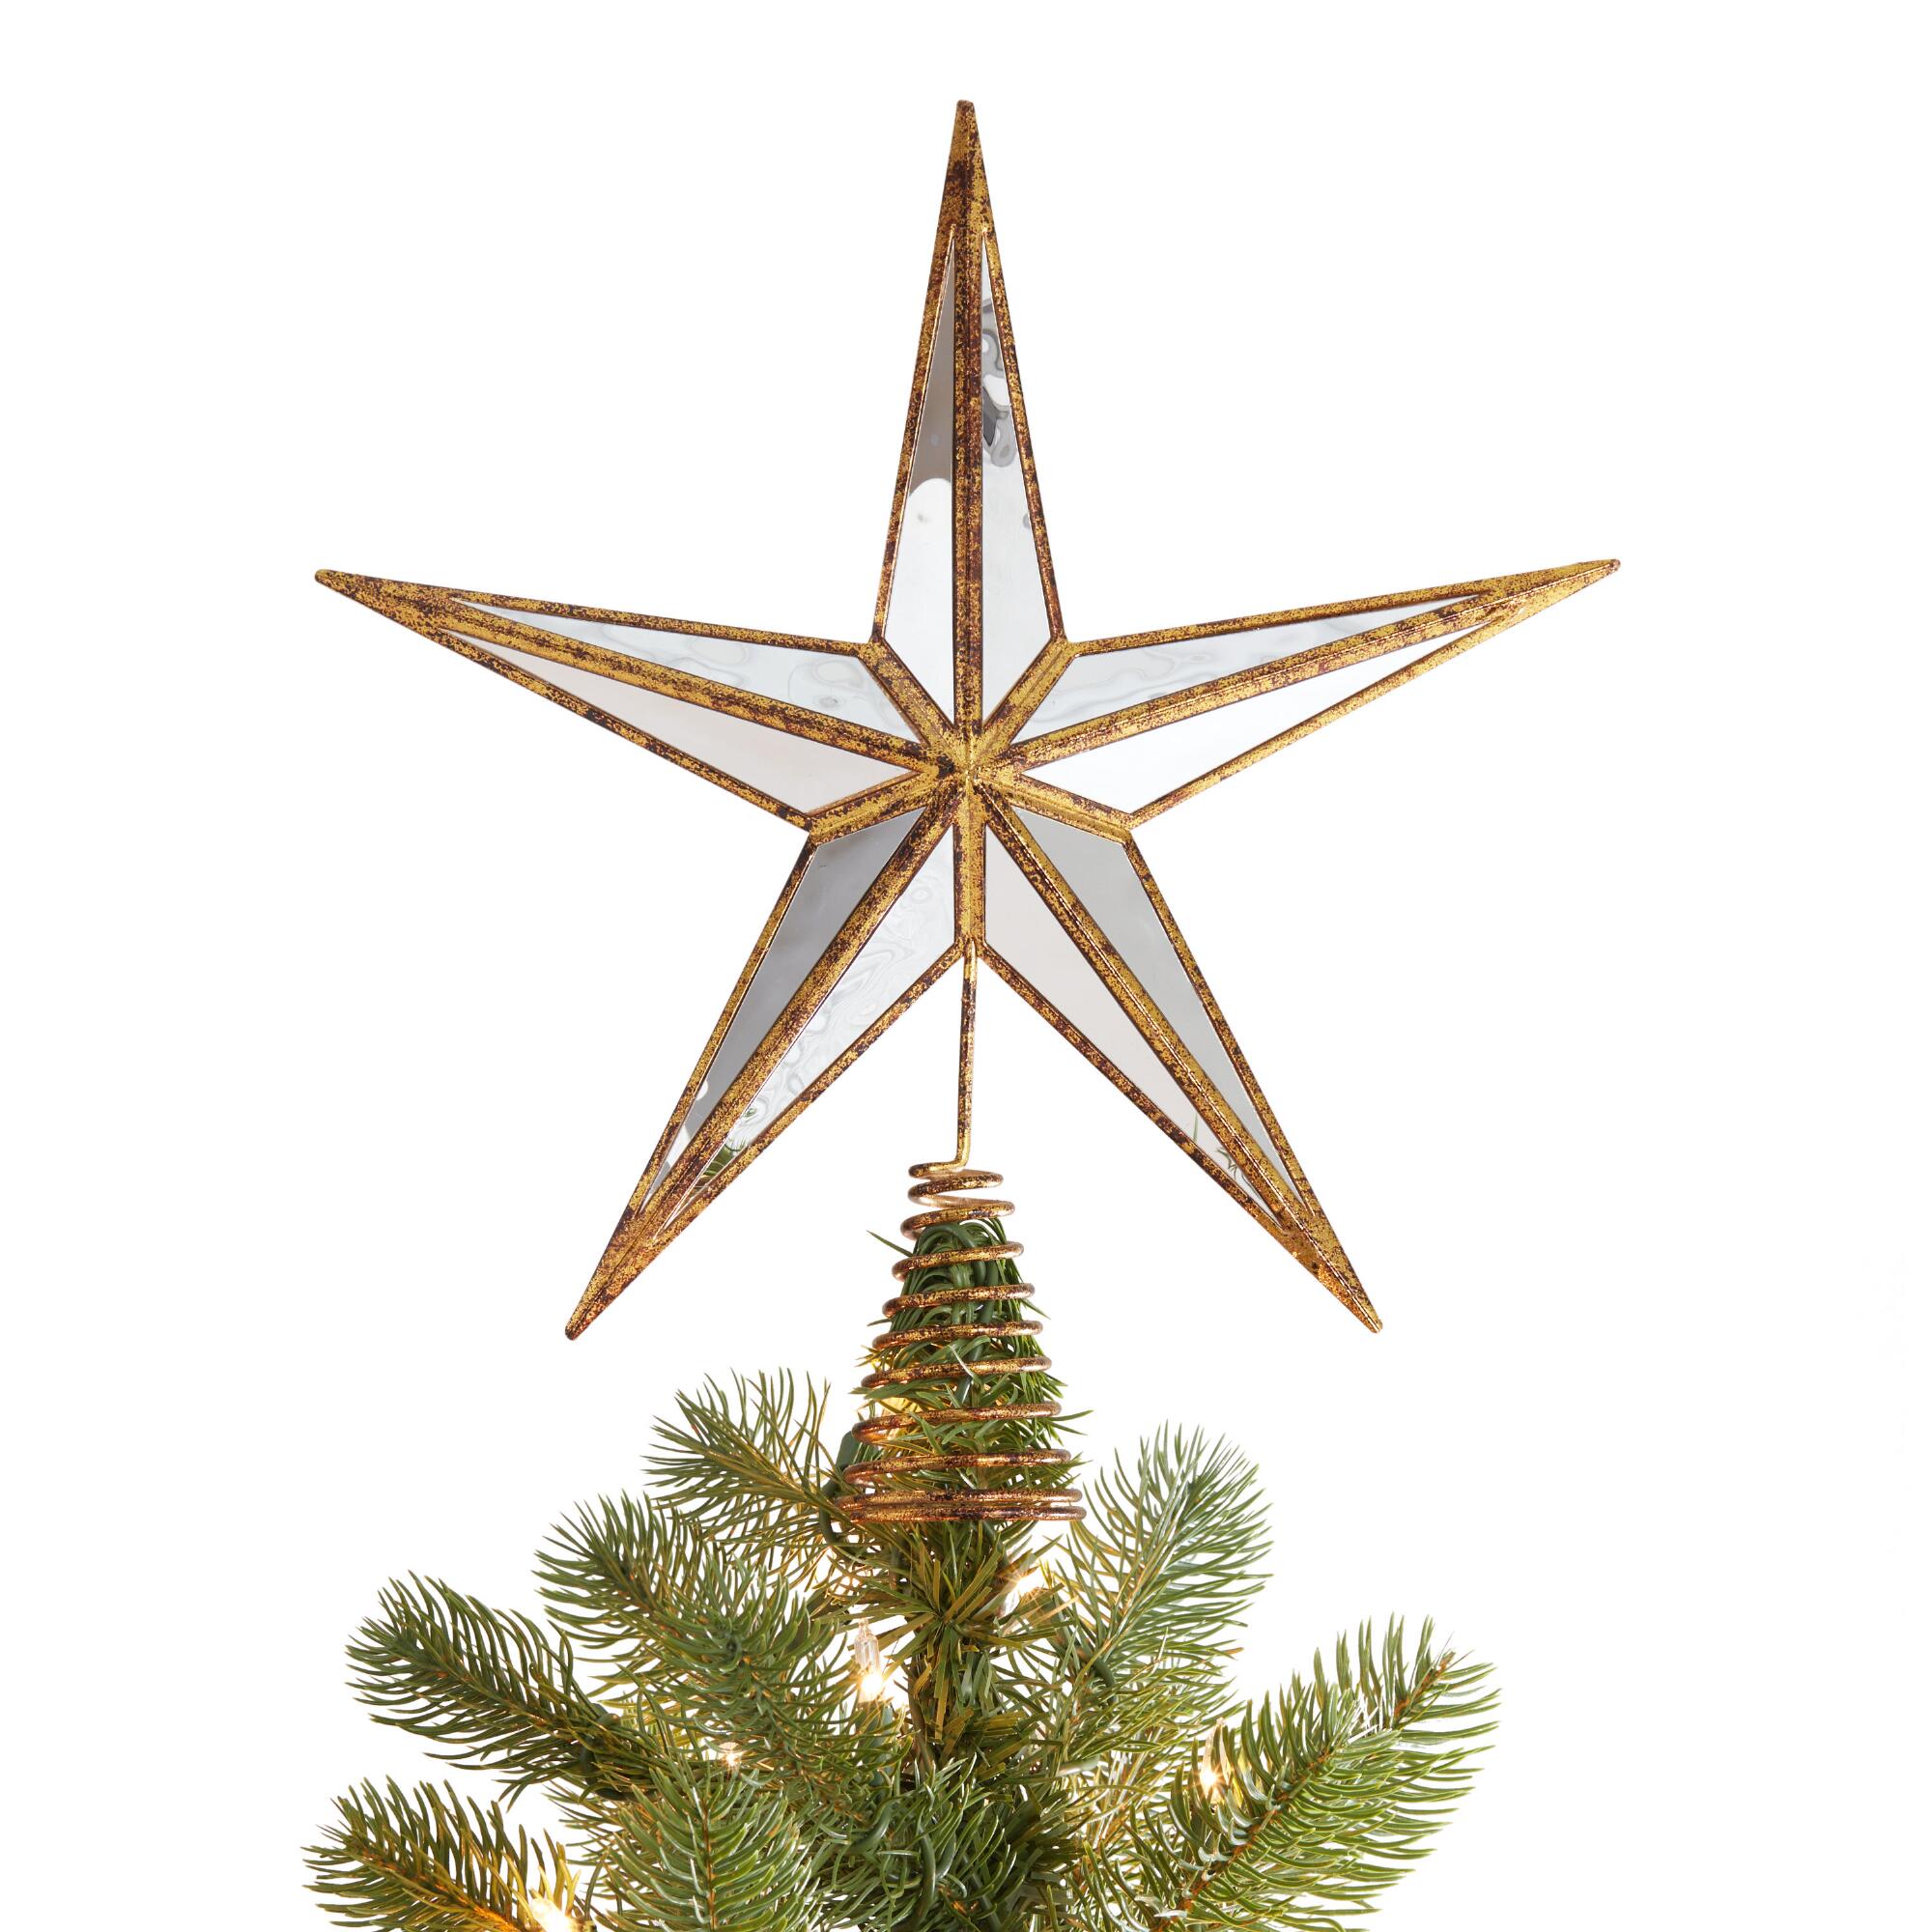 Antique Gold Mirror Star Tree Topper - Acrylic by World Market